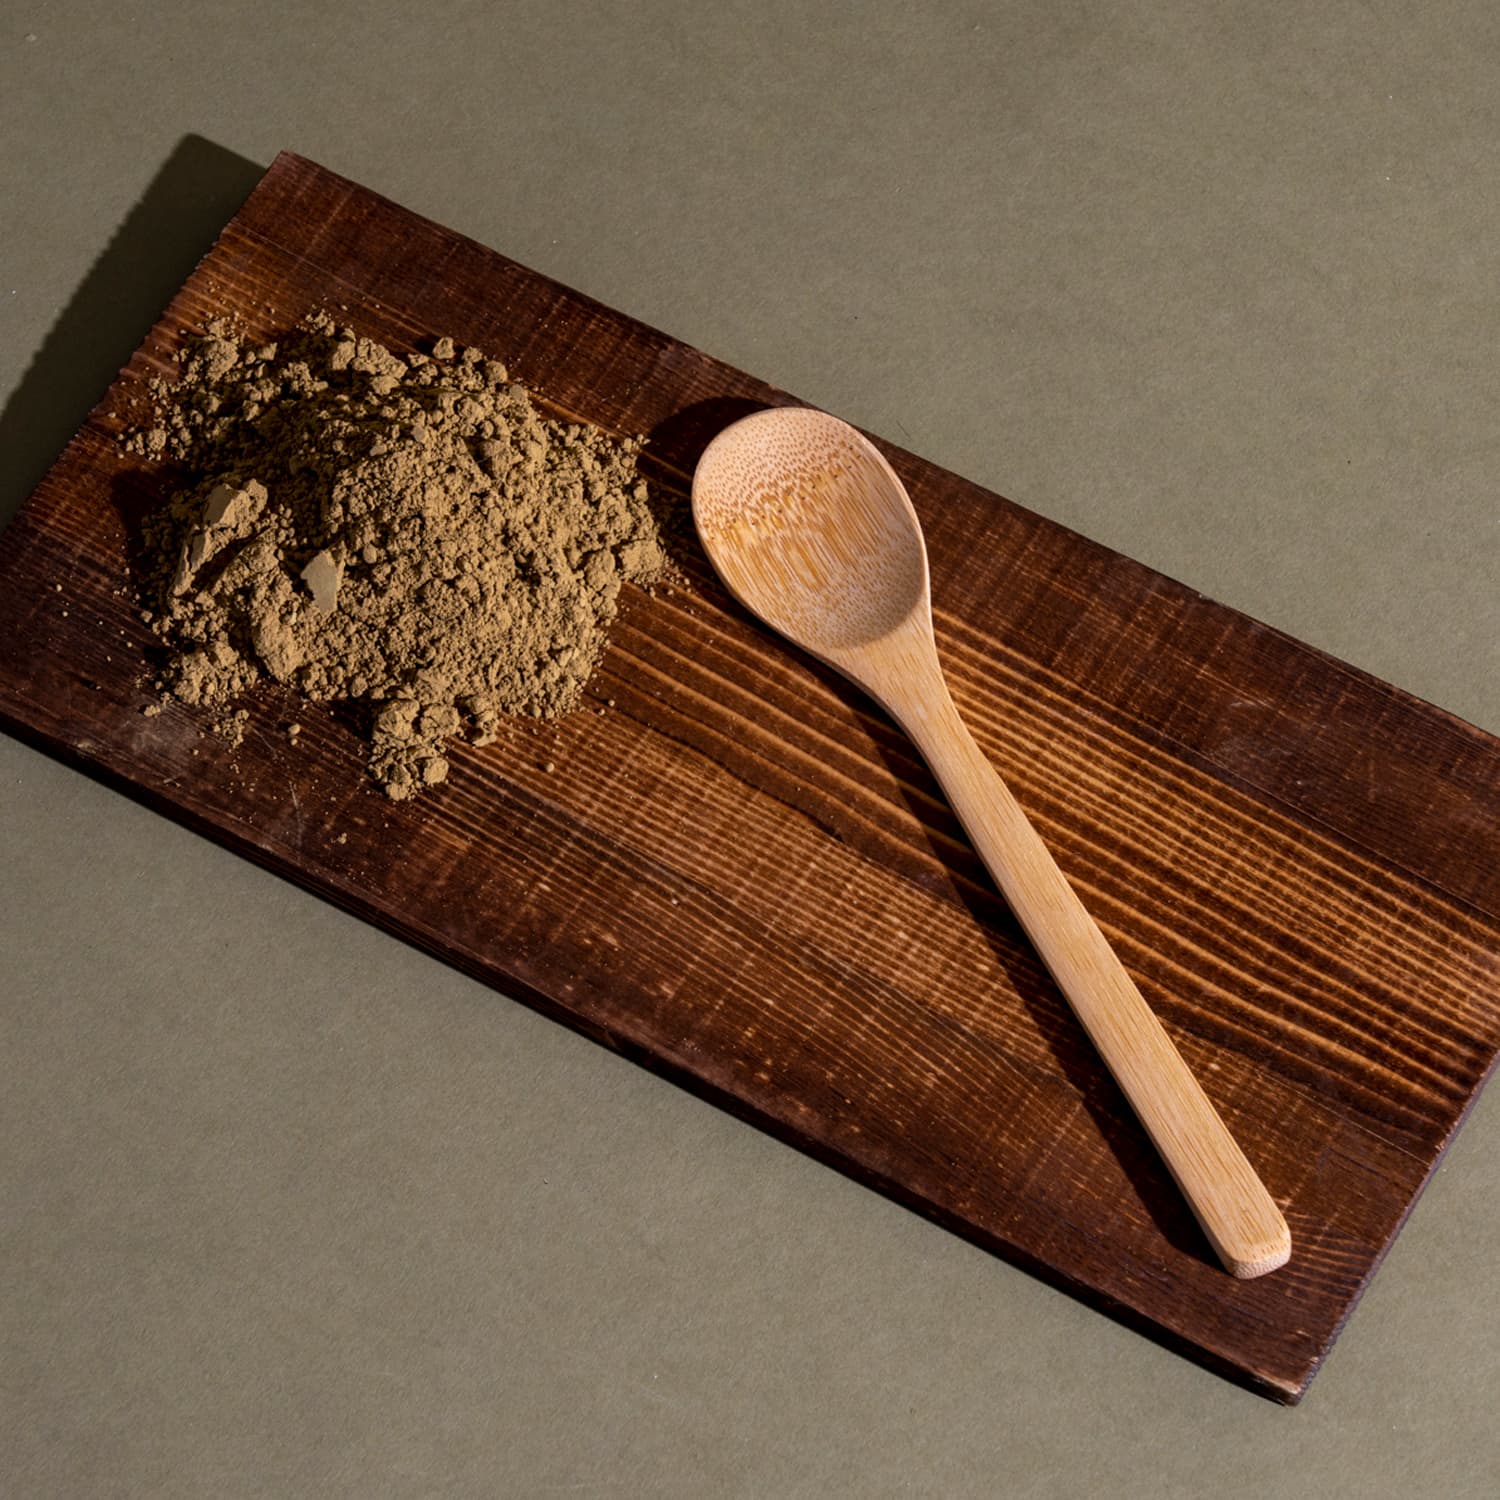 A wooden cutting board with a spoon and brown powder